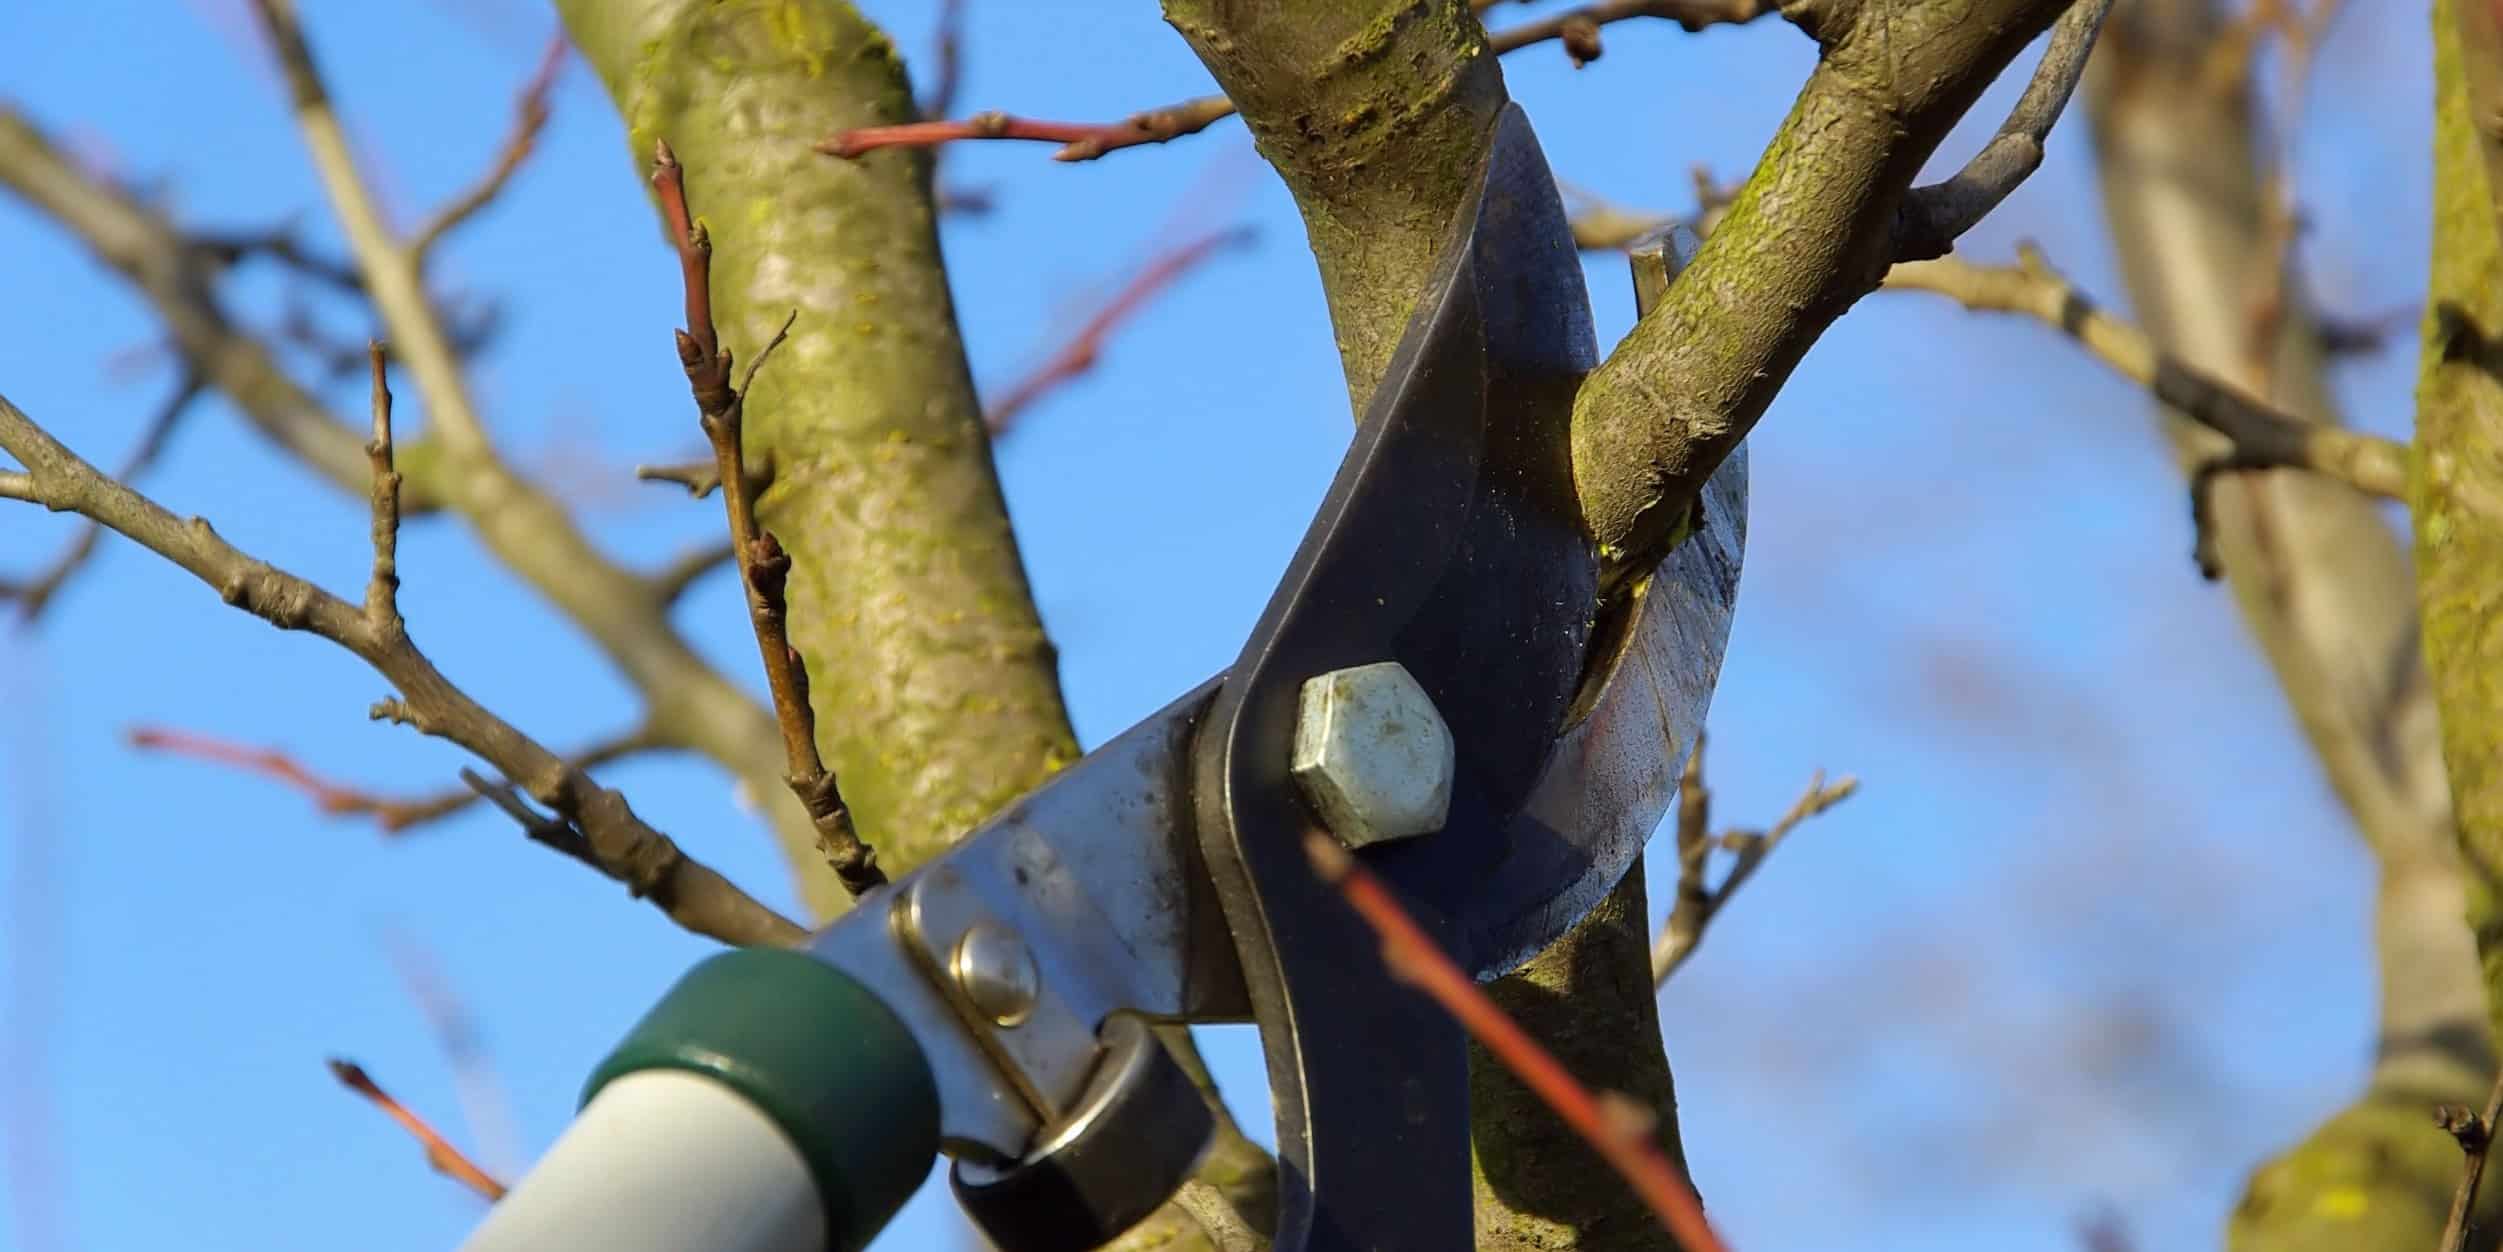 Loppers cutting through a tree branch